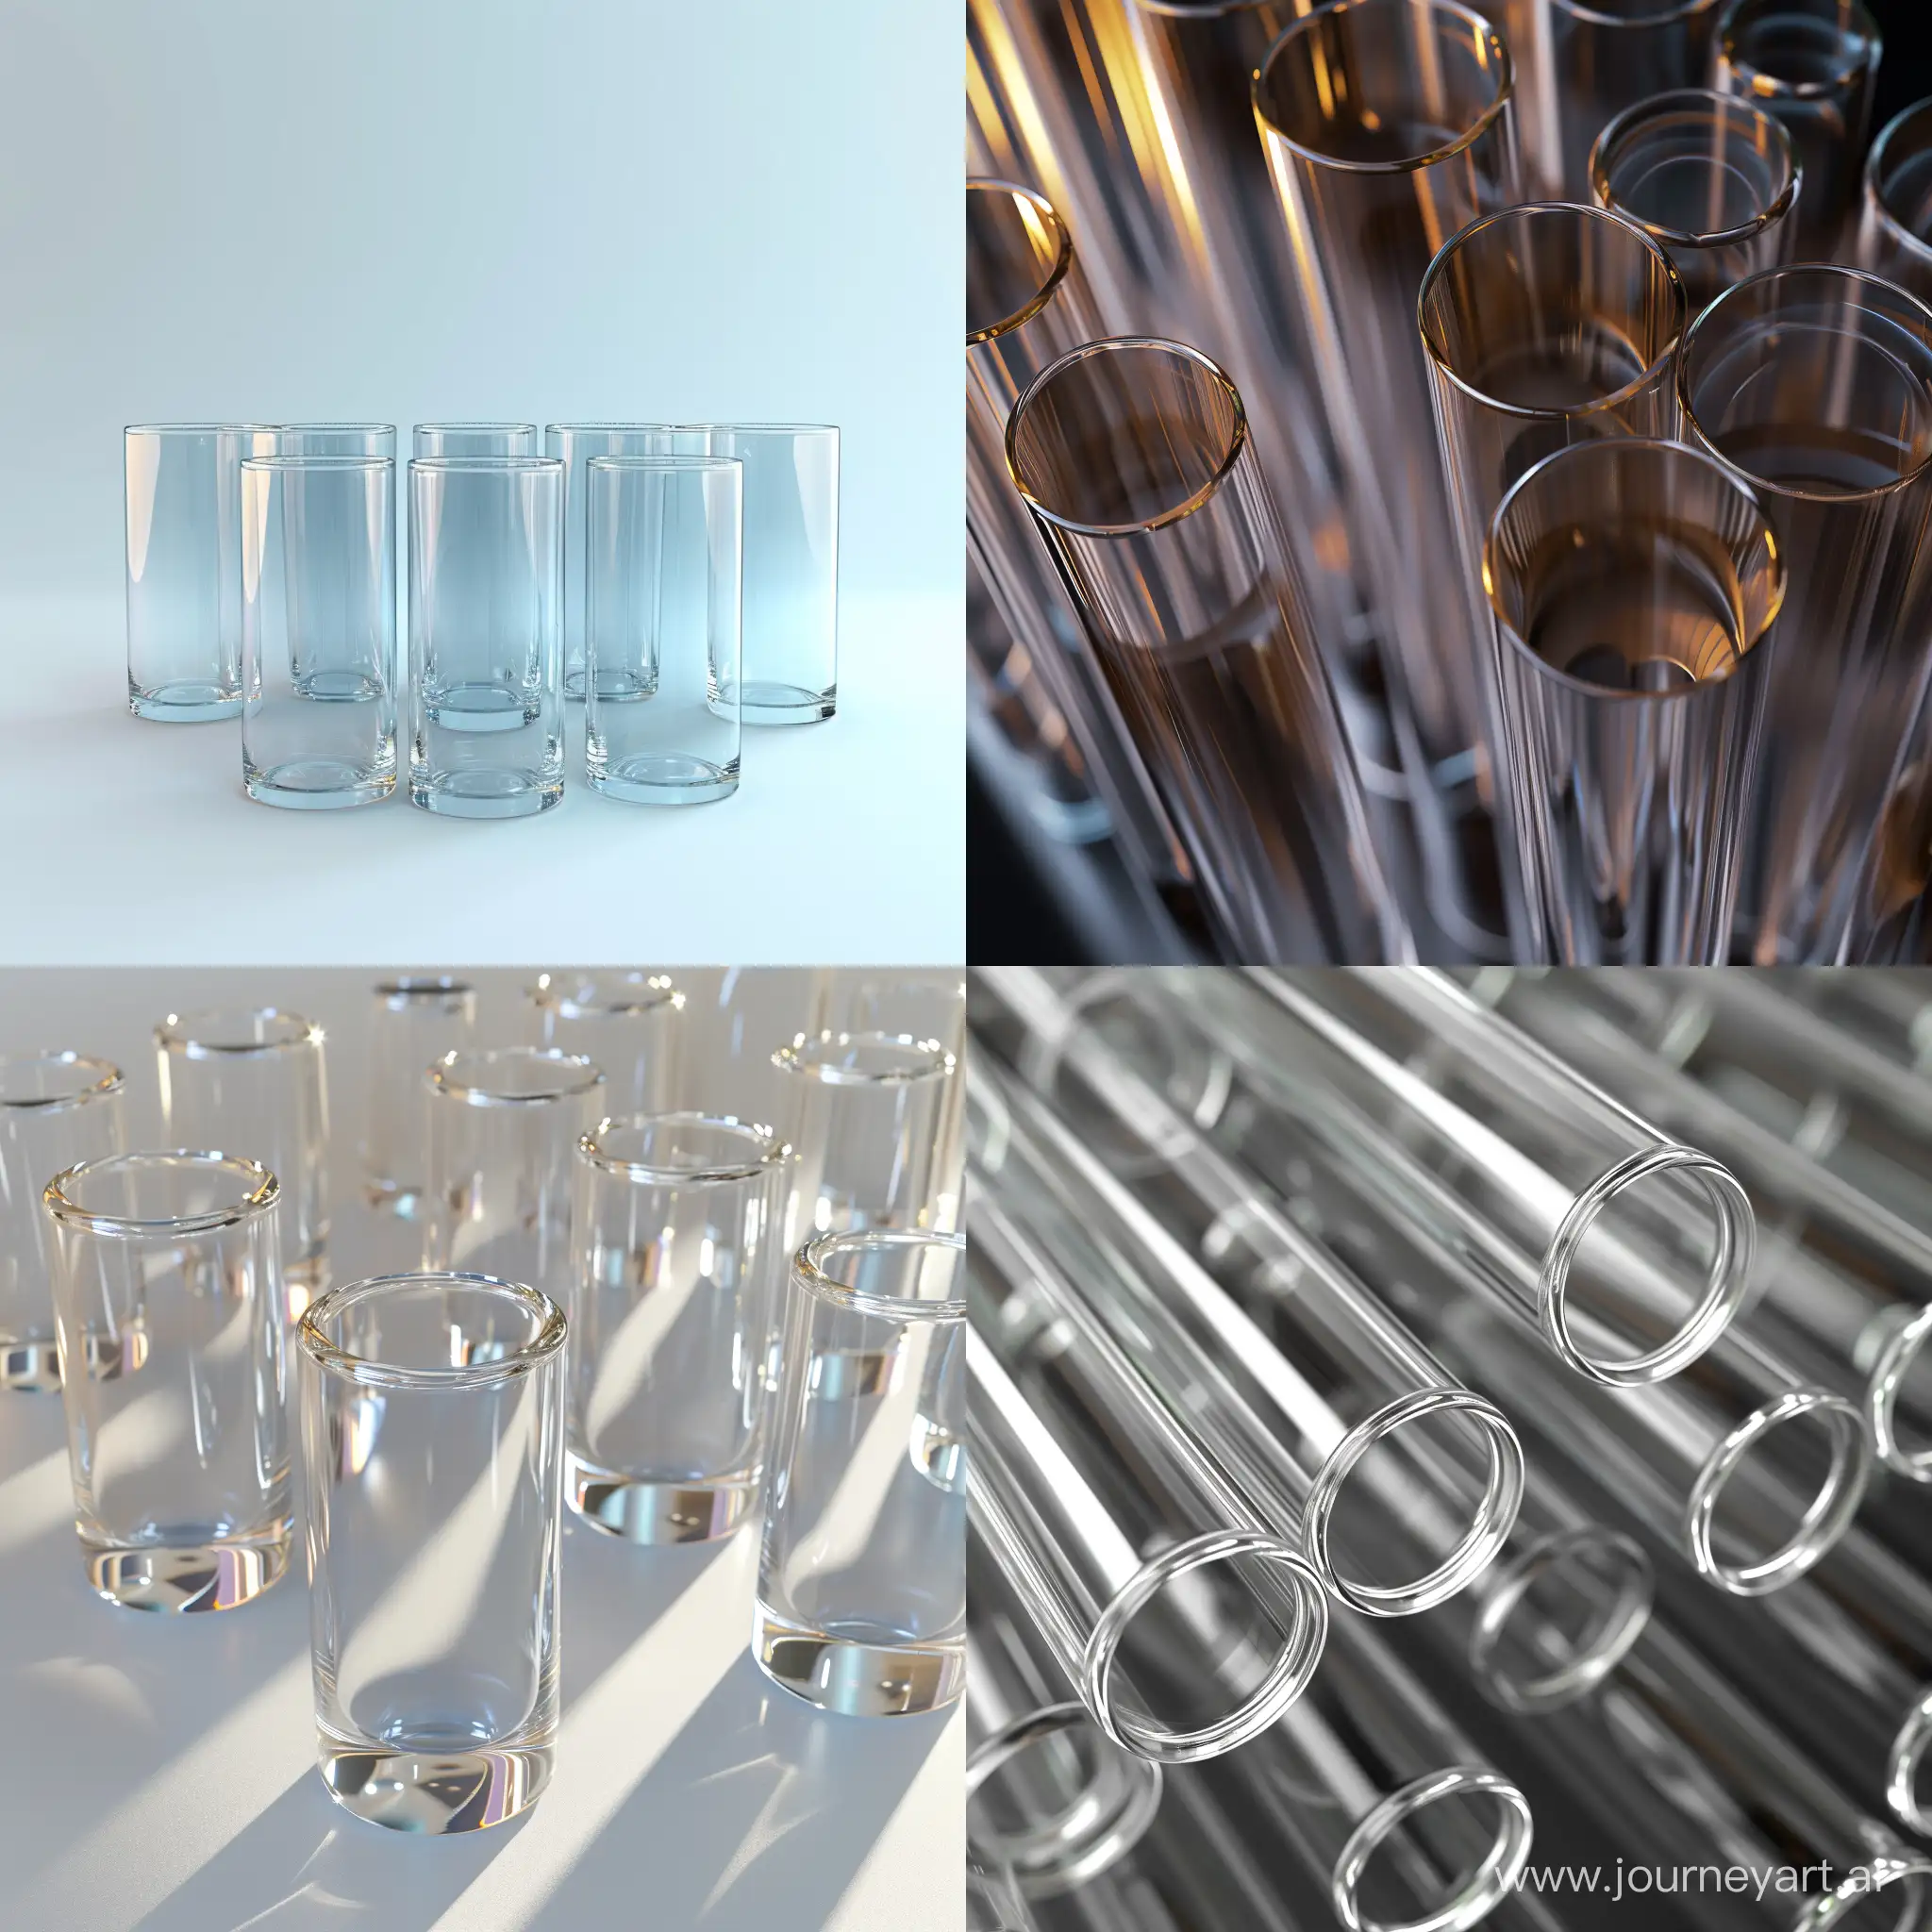 Create a background that is suitable for showcasing and selling glass cylinders 